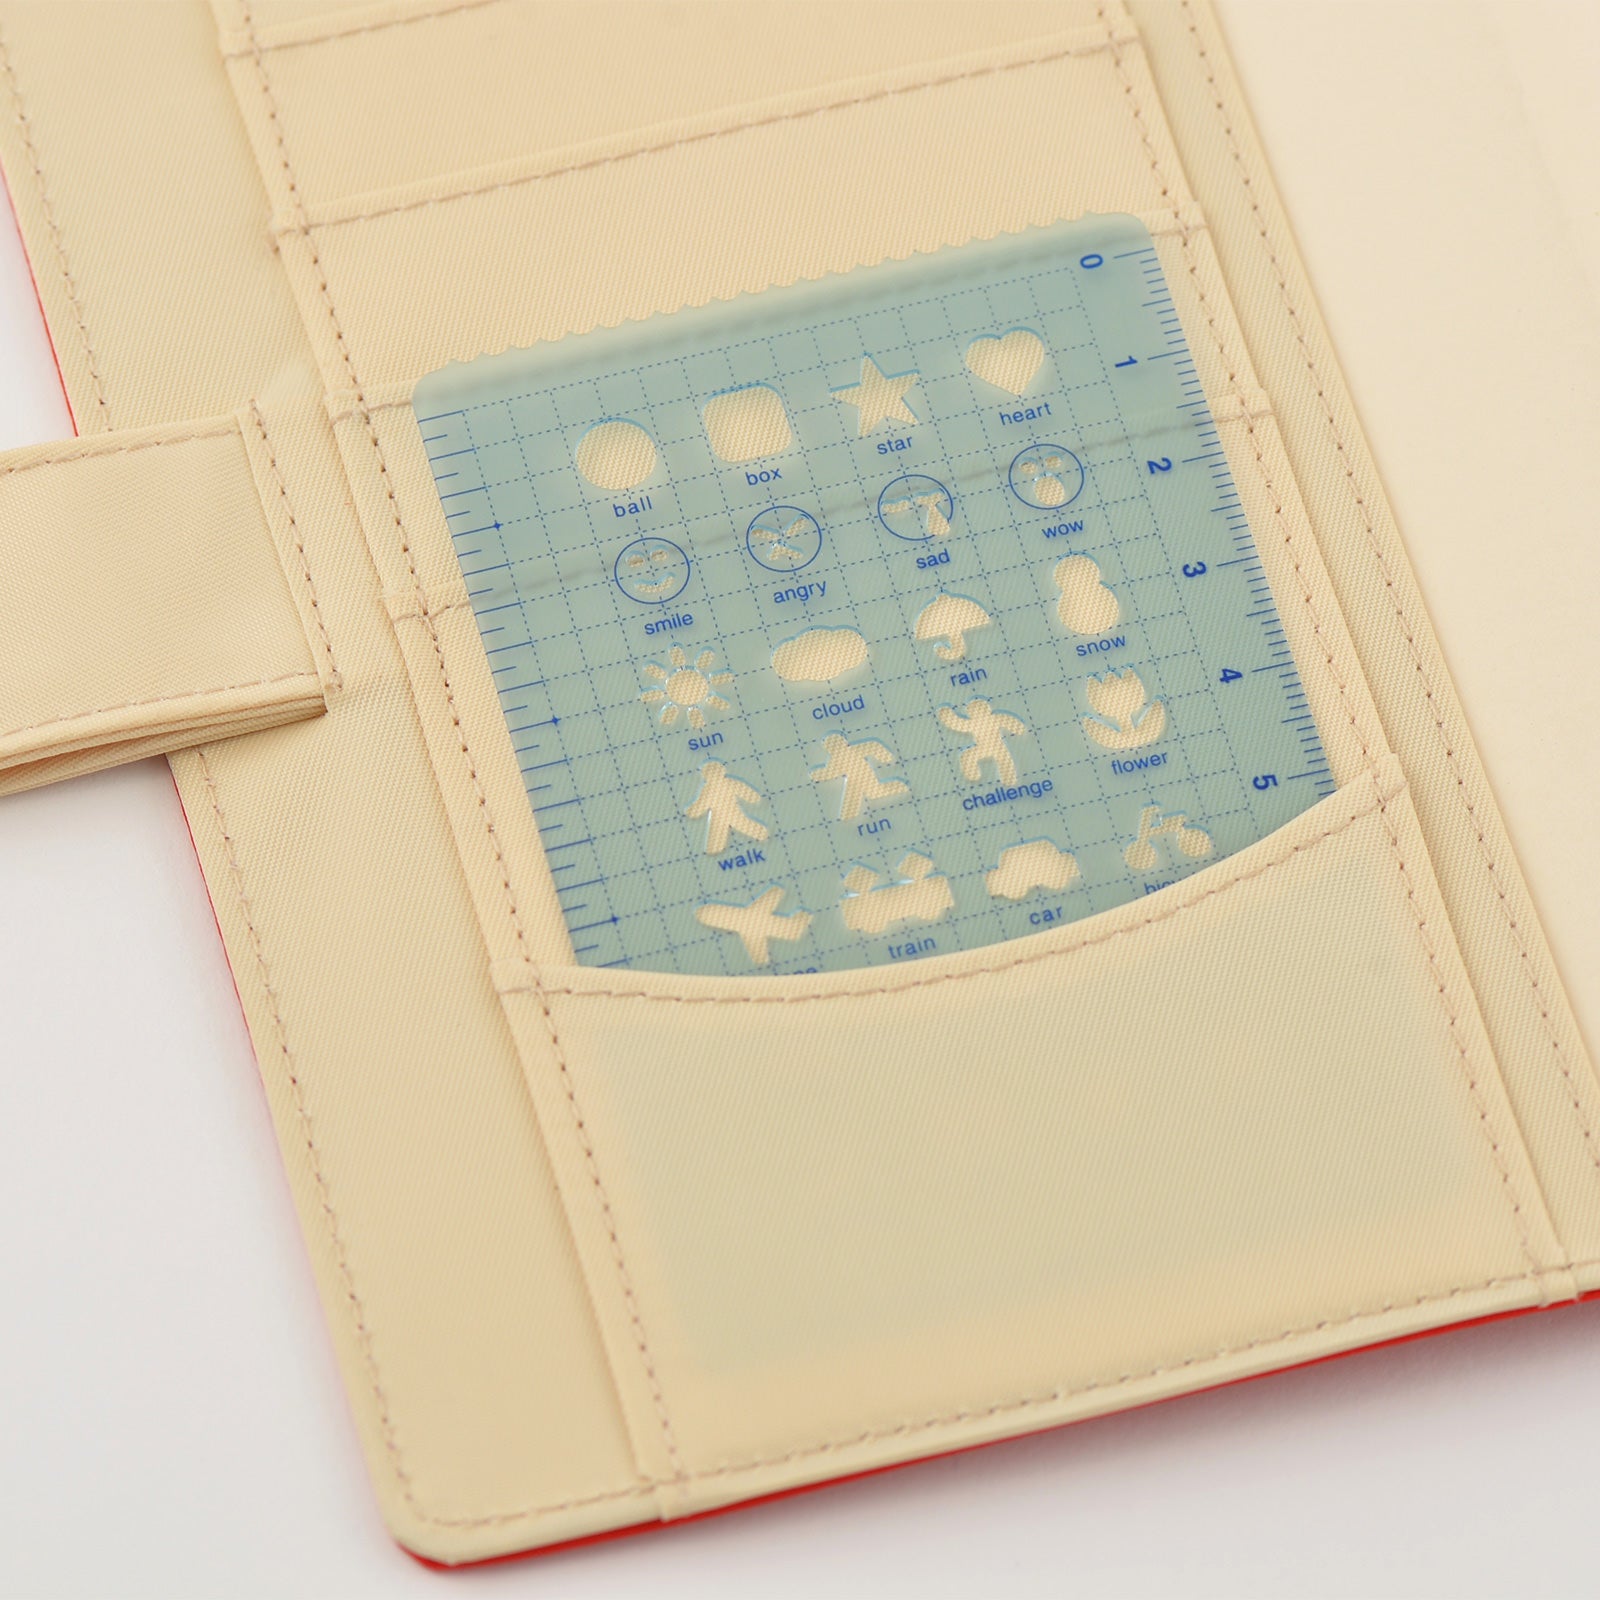 Hobonichi Stencil Activities Hobonichi stencils are designed to perfectly fit into planner cover pockets.  The Activities set includes symbols for vehicles, weather, and smiley faces.